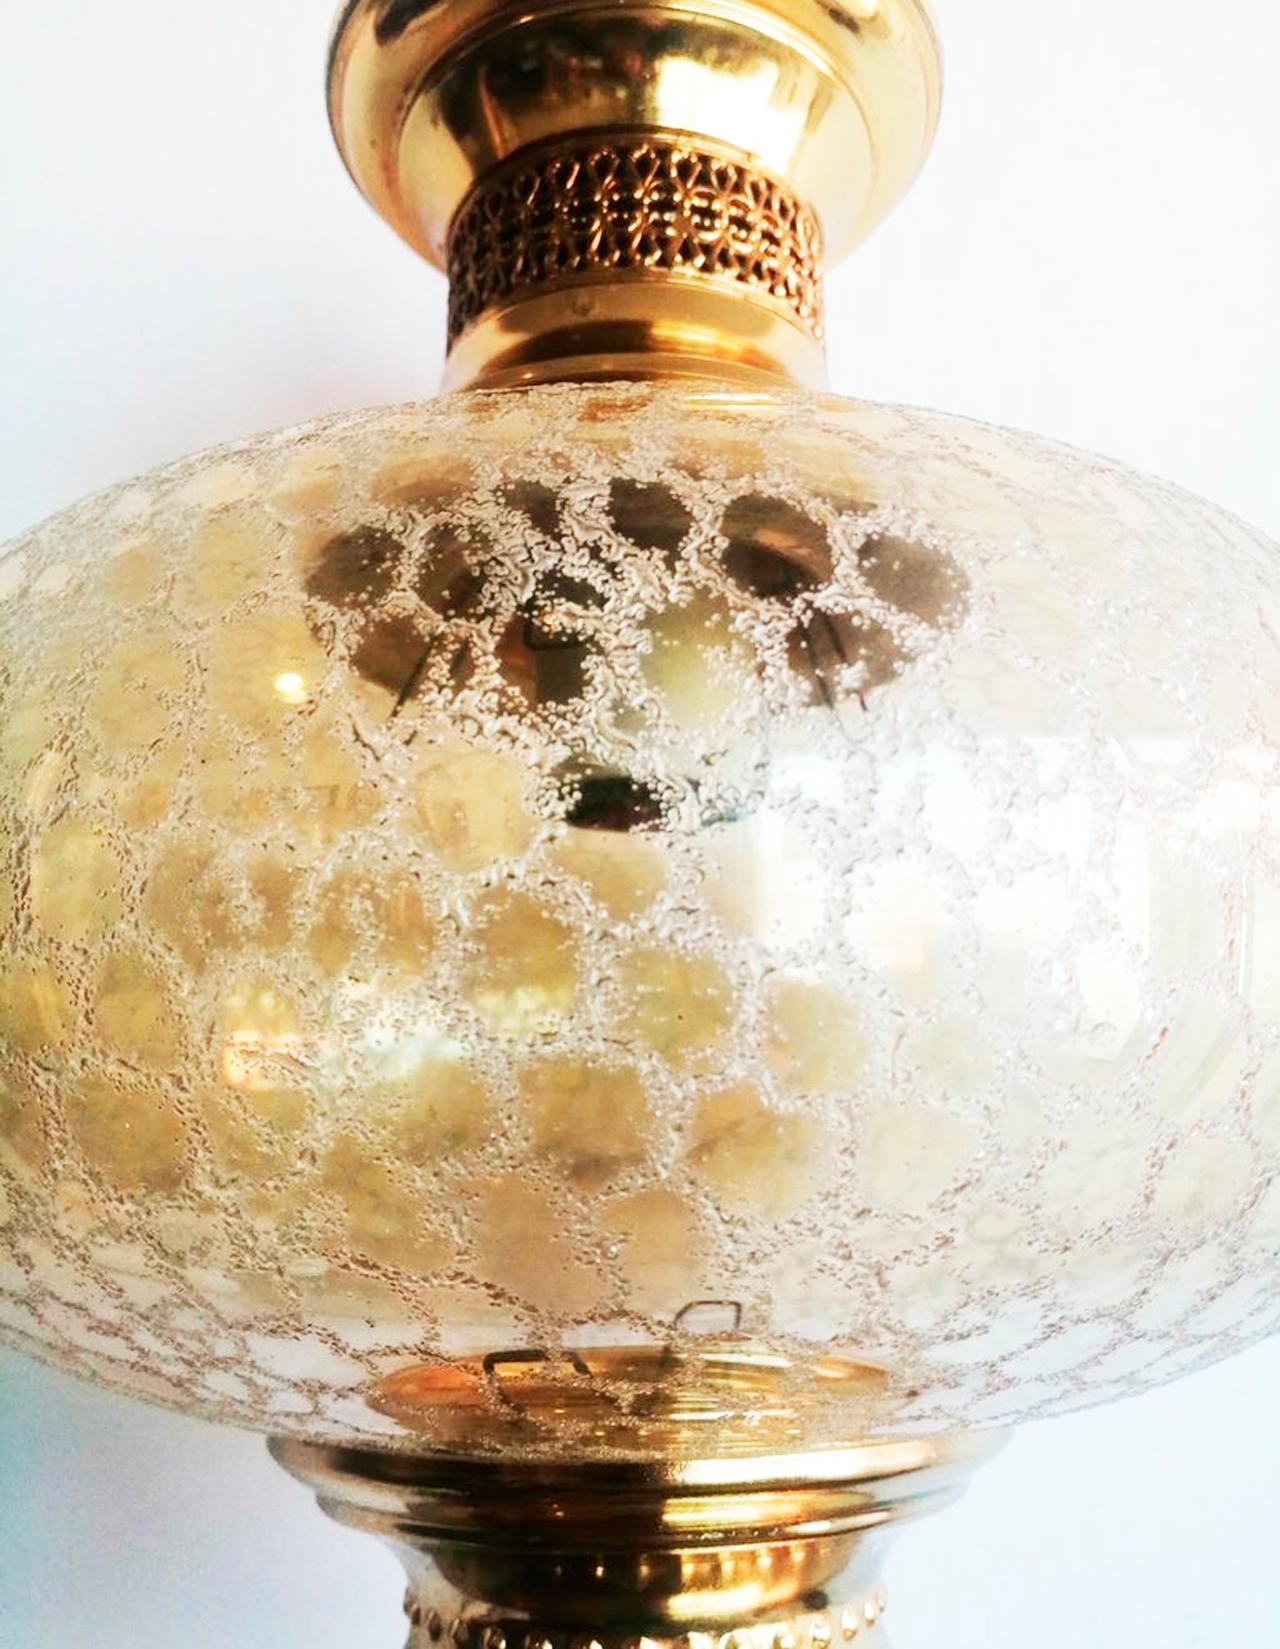 There are two units available, price is per each

Brass lantern or pendant and engraved crystal globe,

Golden lanterns or pendant lamps with a fine gold color, oriental or Islamic style. They come from the south of Spain, from Andalusia, with an